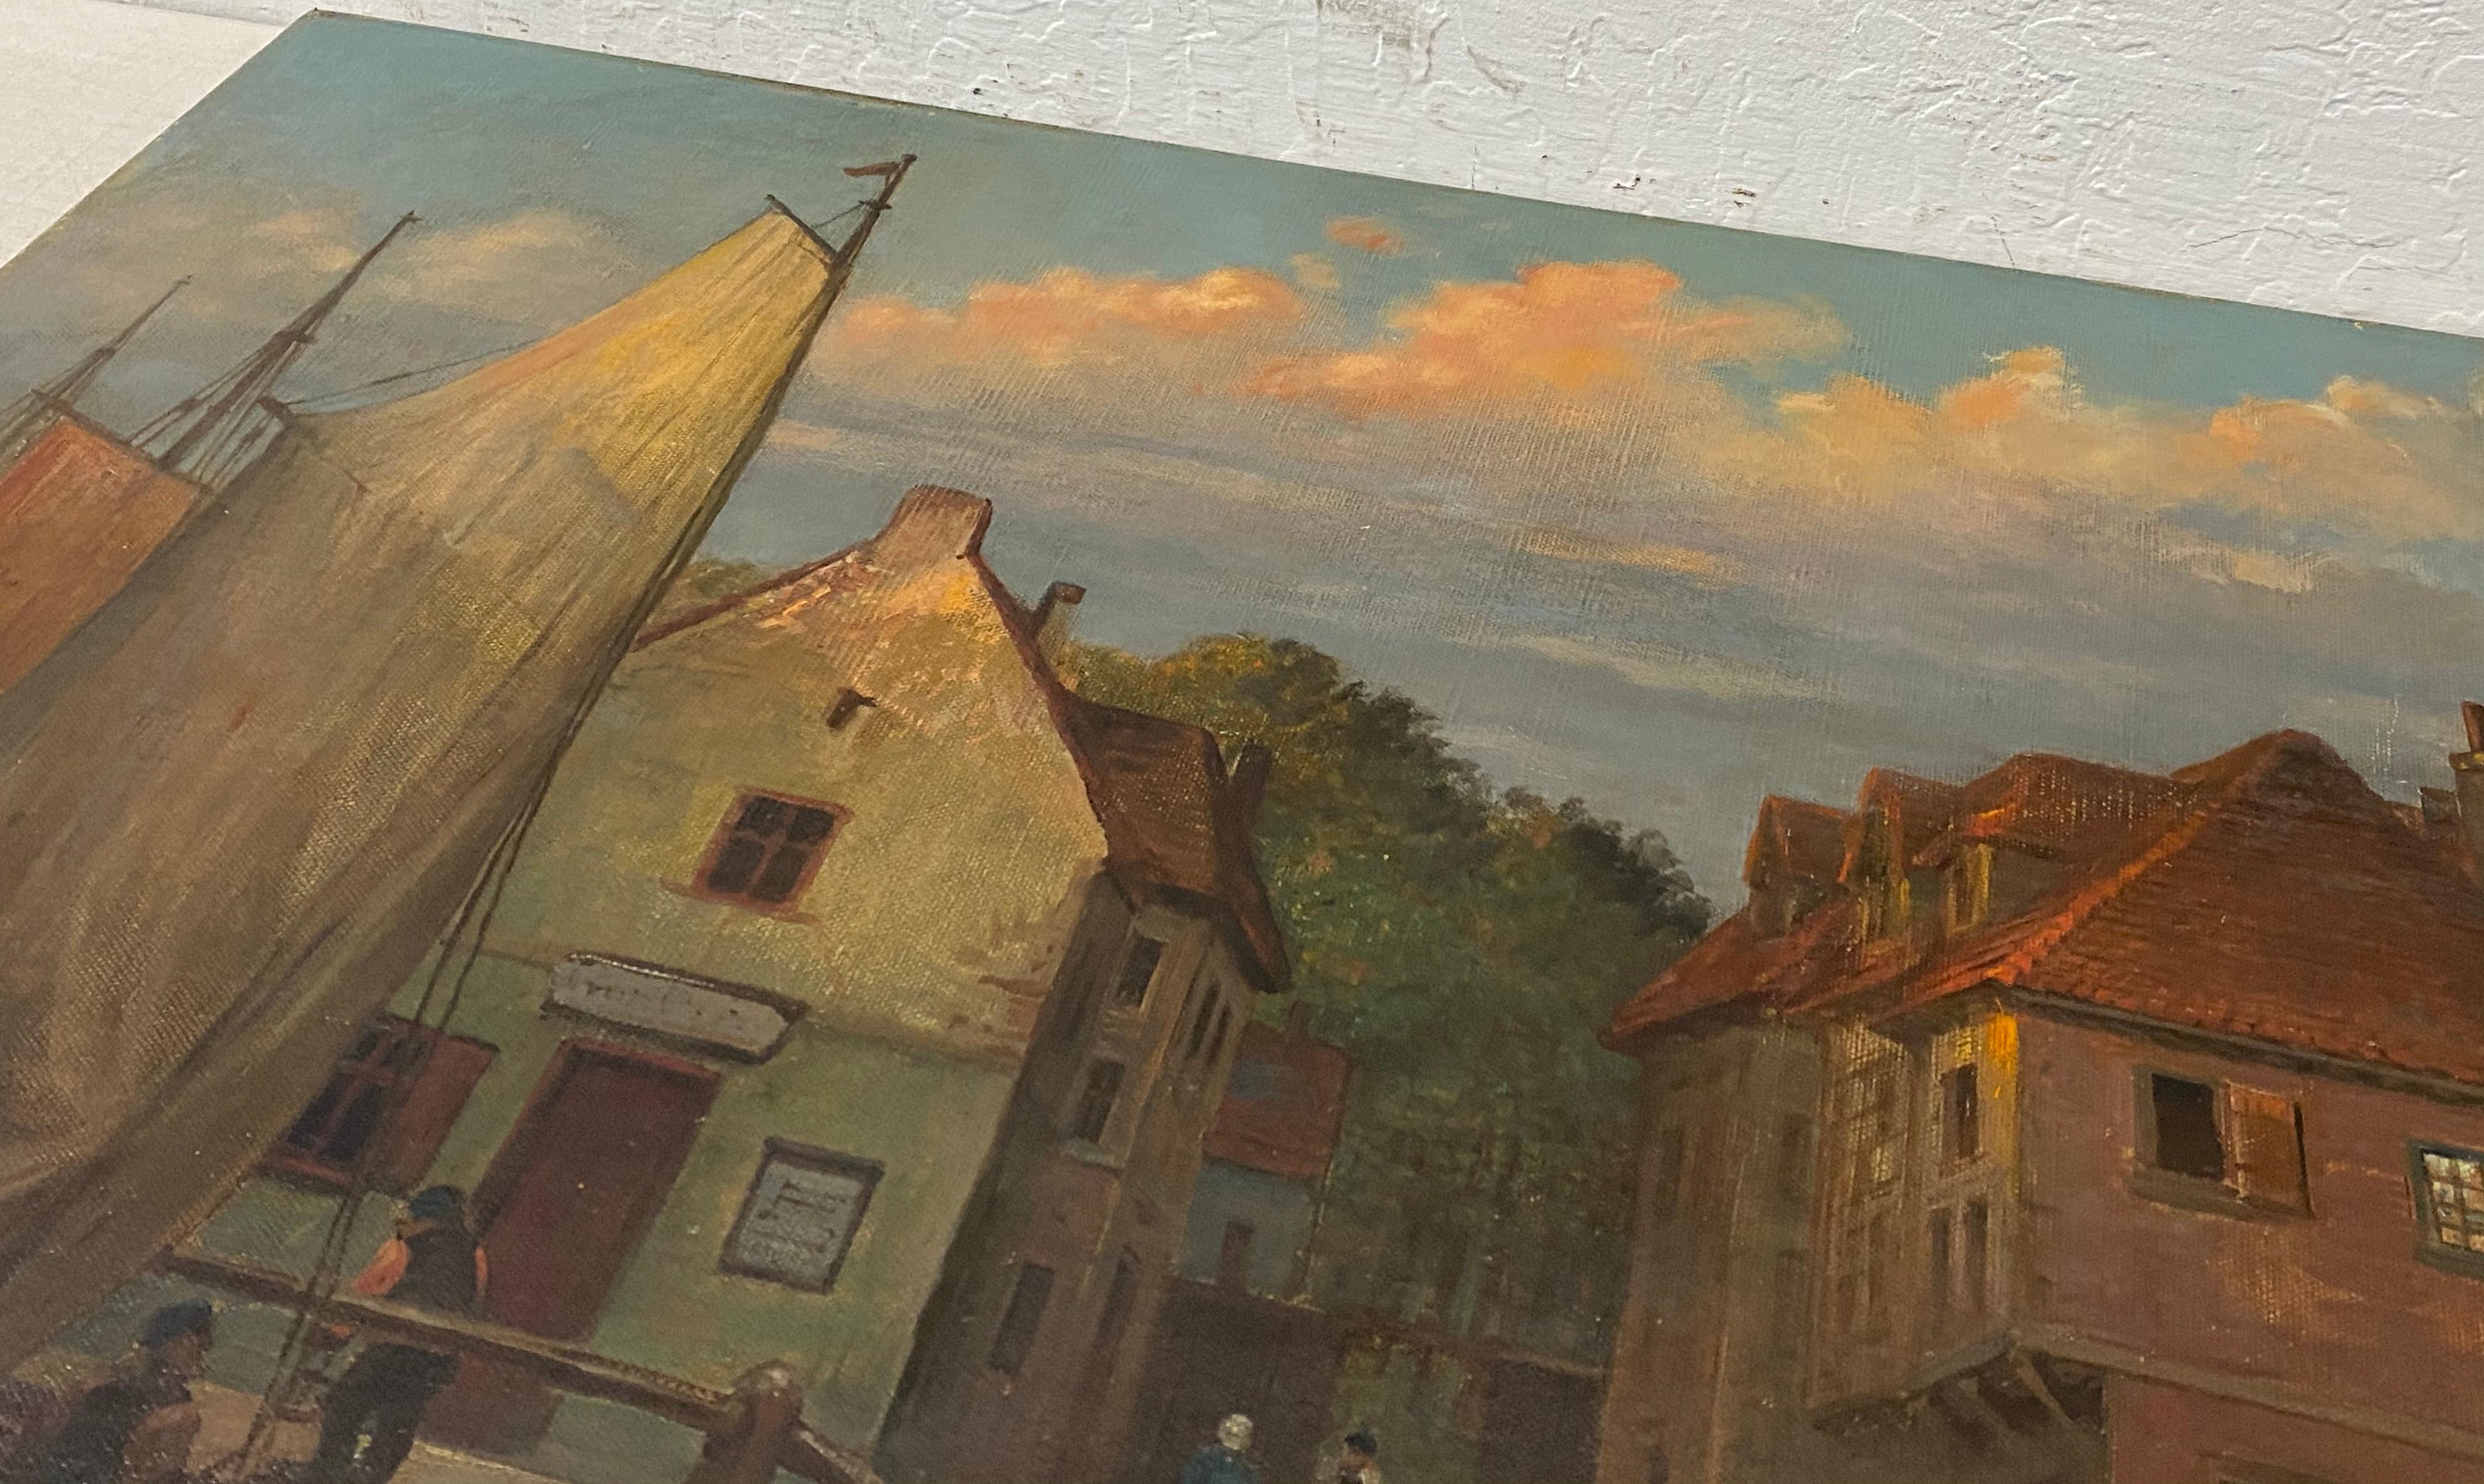 Early 20th Century Dutch Street Scene with Figures and Boats 

Original oil on relined canvas. Signed lower left (illegible)

The painting is in good condition with a few minor scratches. Please review all images.

The signature may (or may not) be